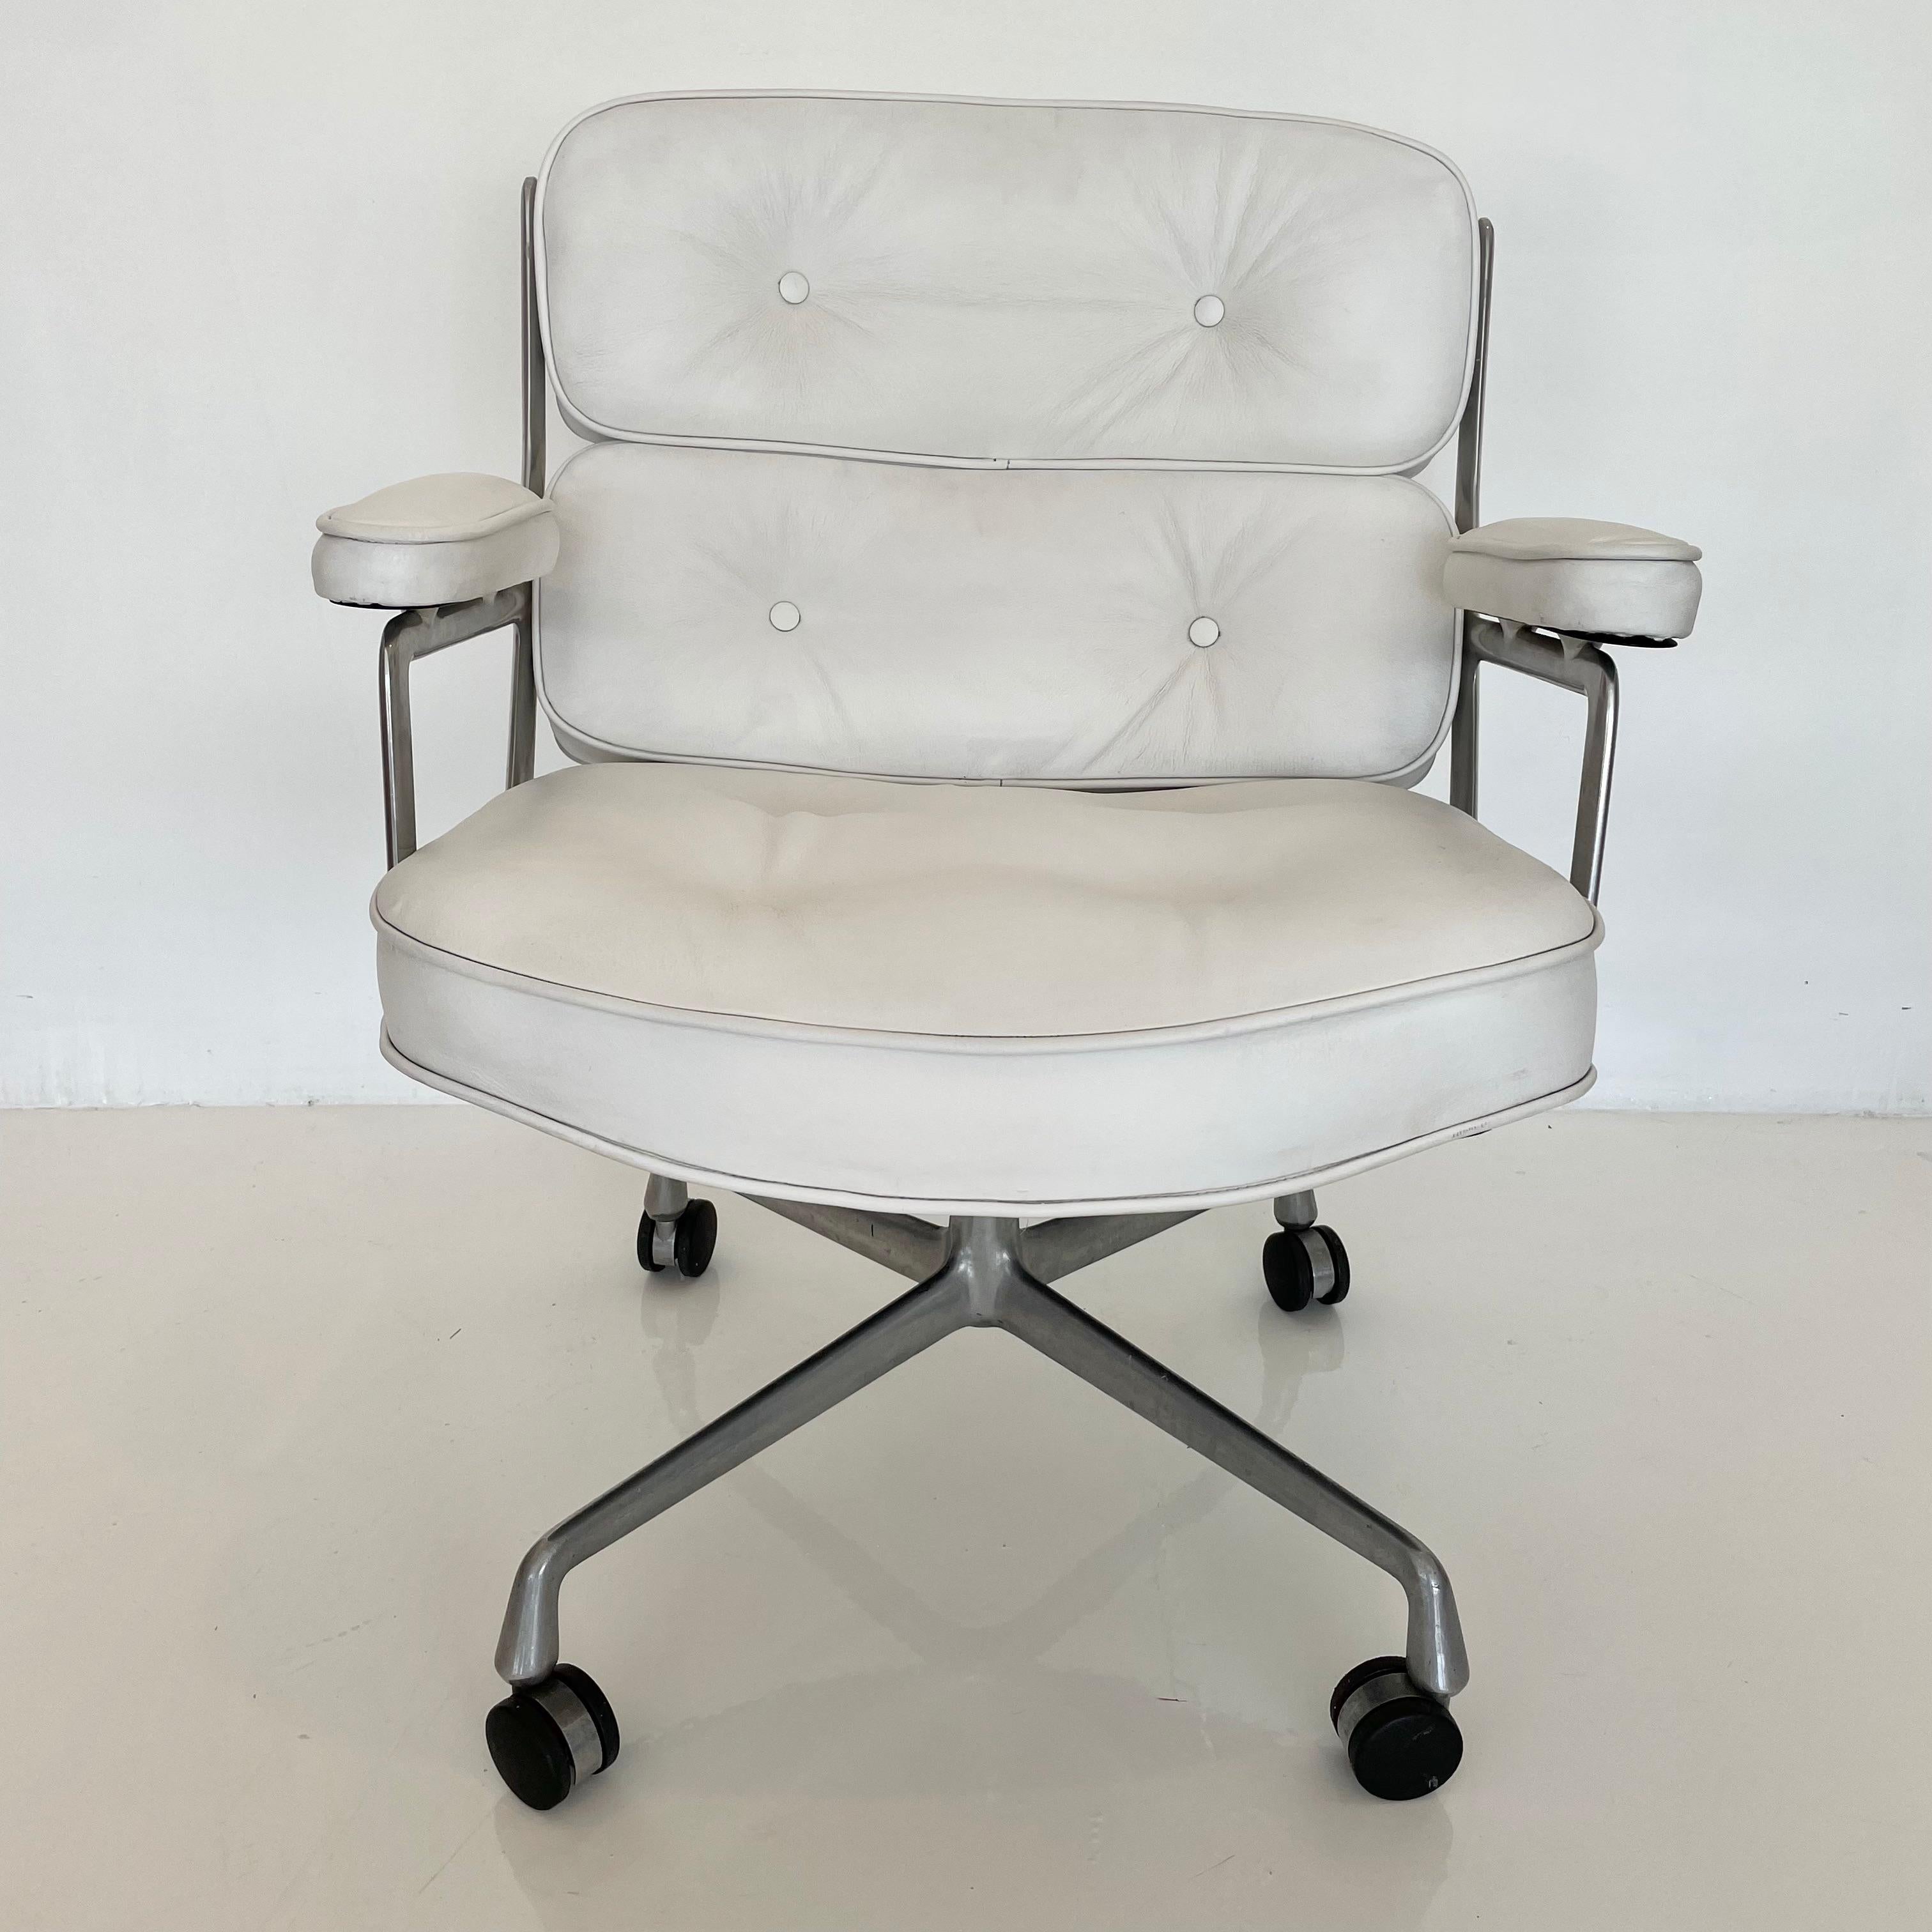 Original Eames Time Life Chair in White Leather 11